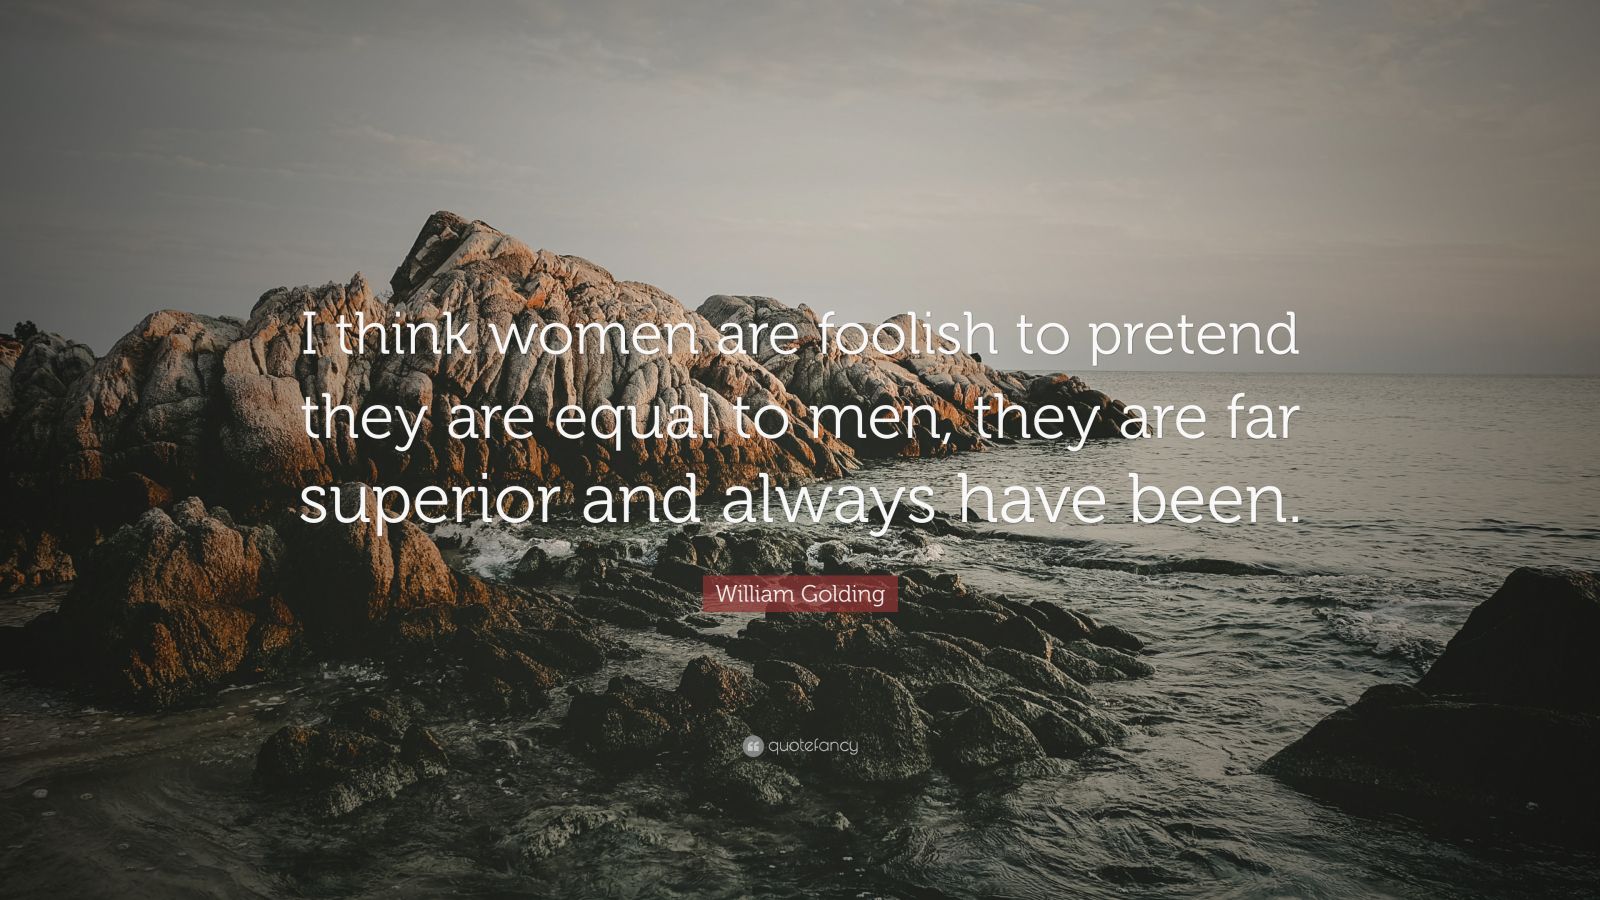 William Golding Quote: "I think women are foolish to pretend they are equal to men, they are far ...